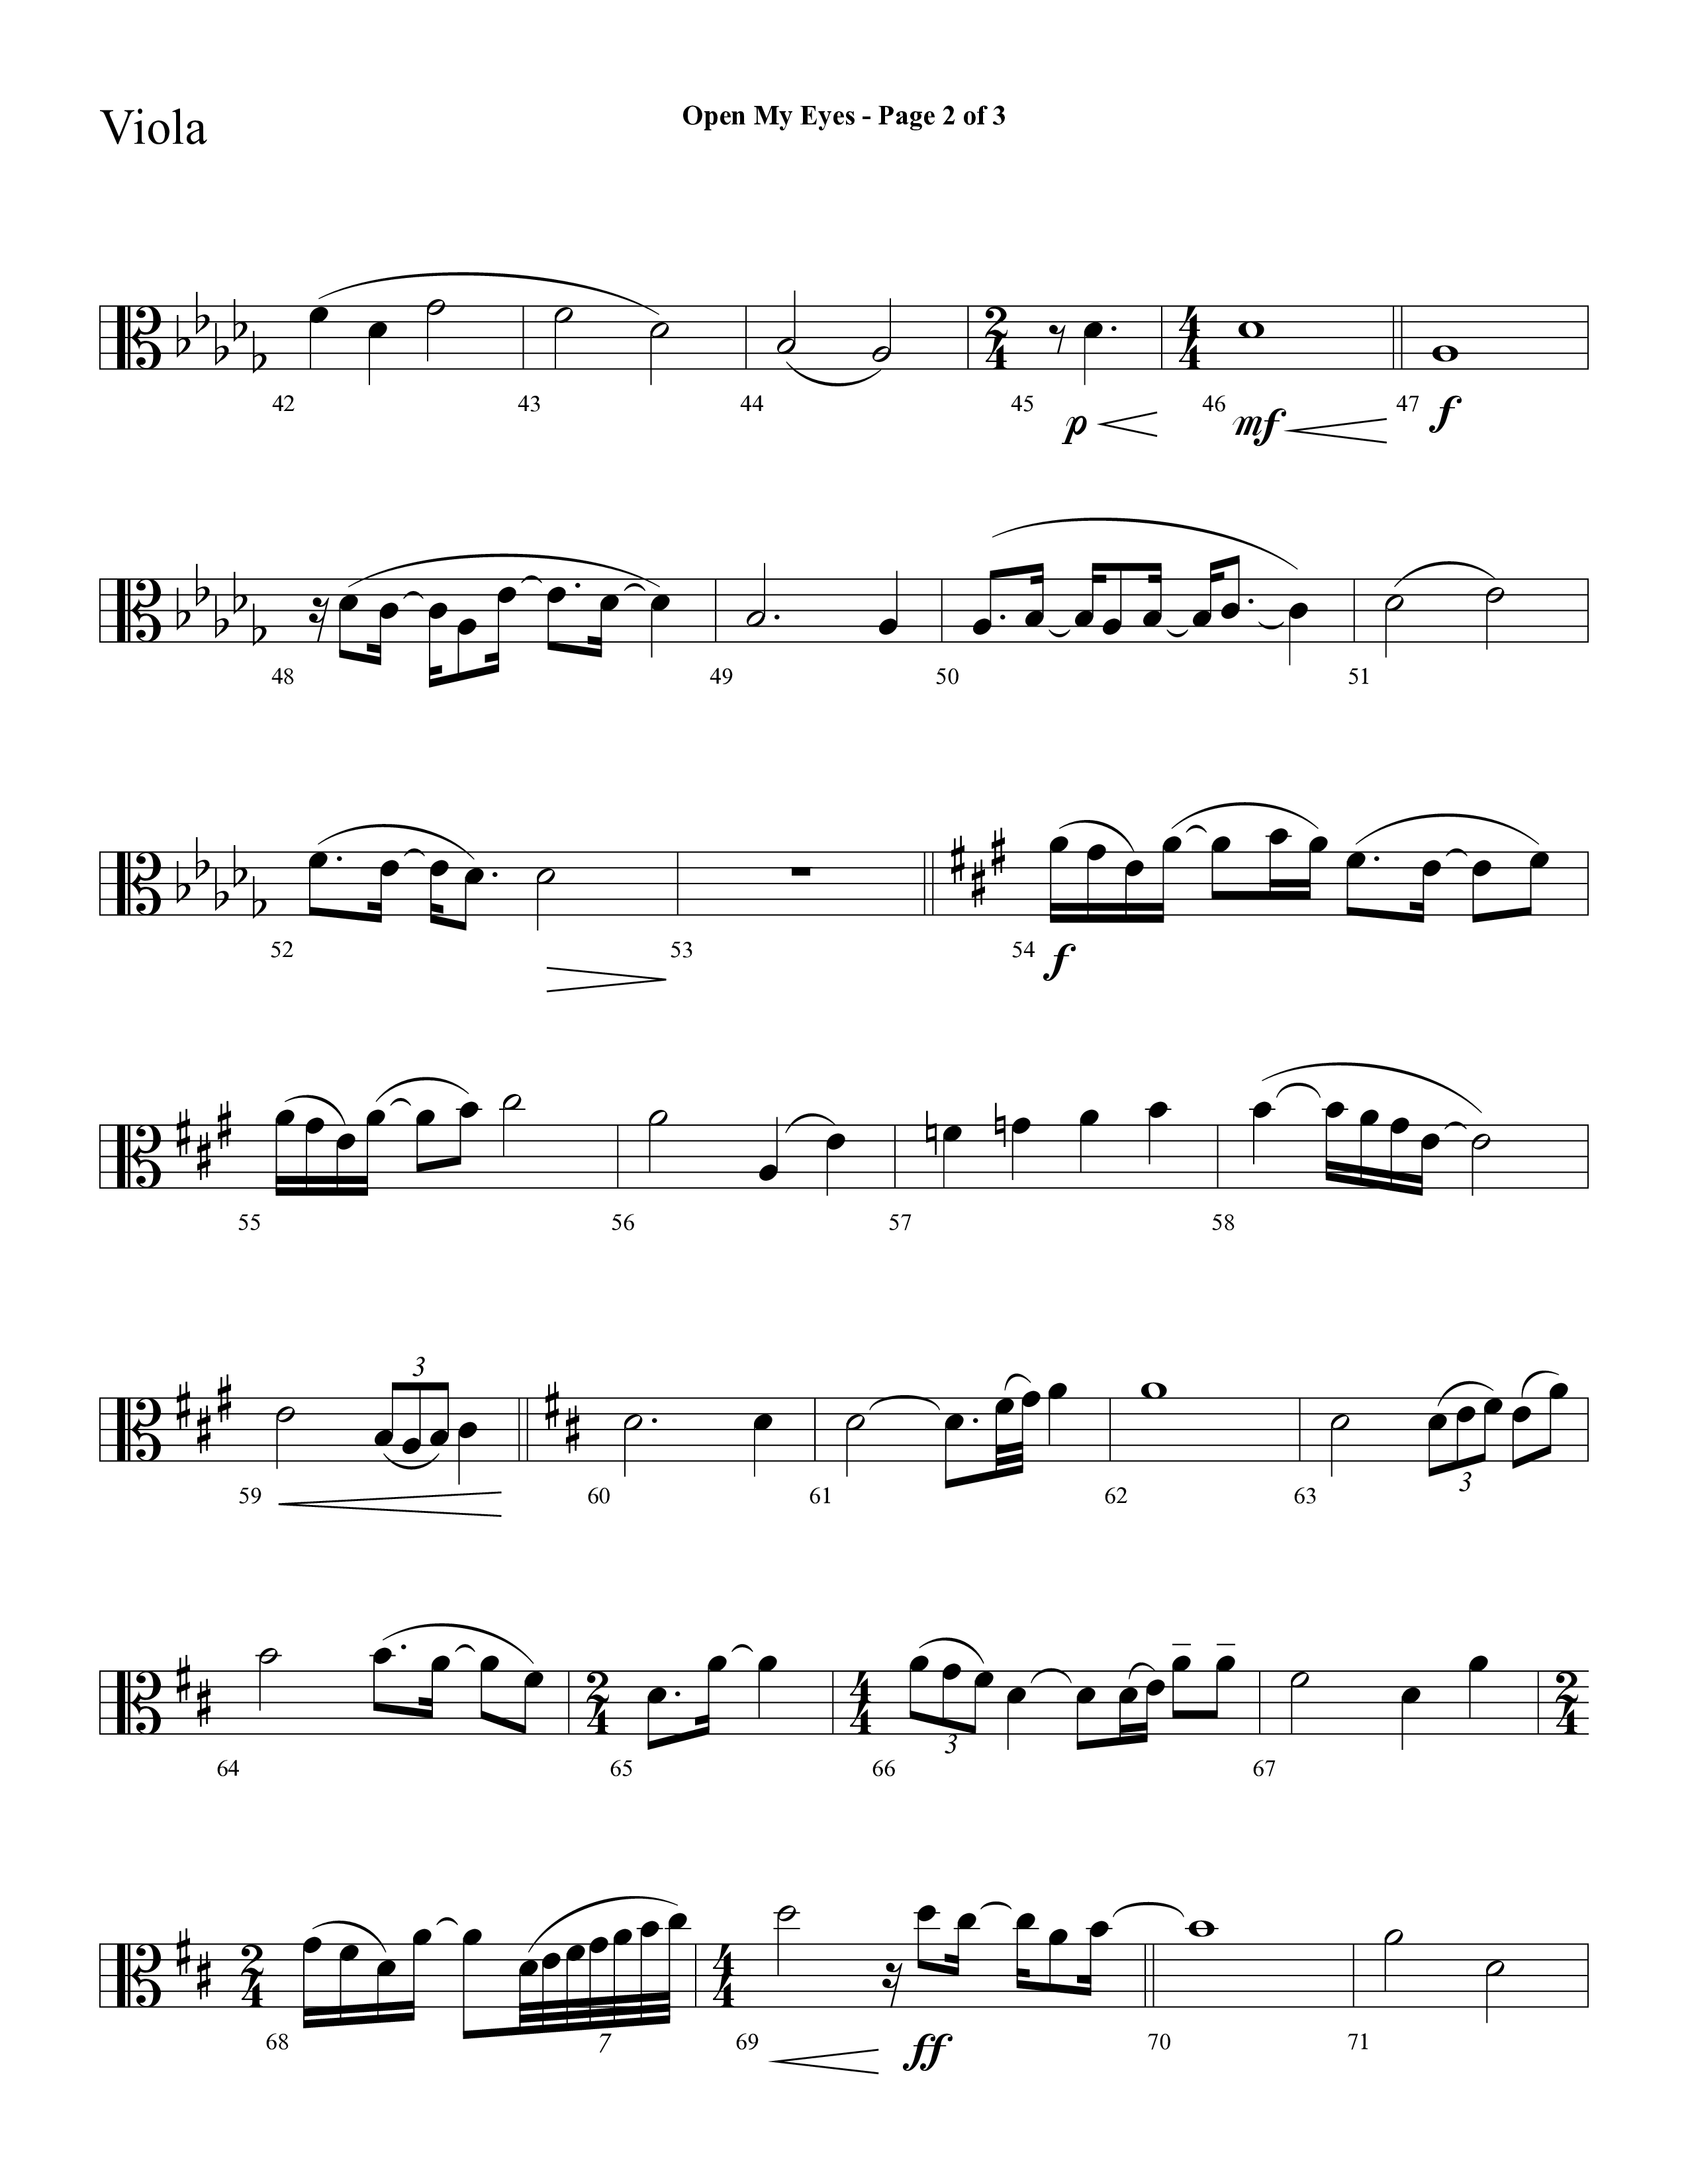 Open My Eyes (with Be Thou My Vision) (Choral Anthem SATB) Viola (Arr. Cliff Duren / Lifeway Choral)